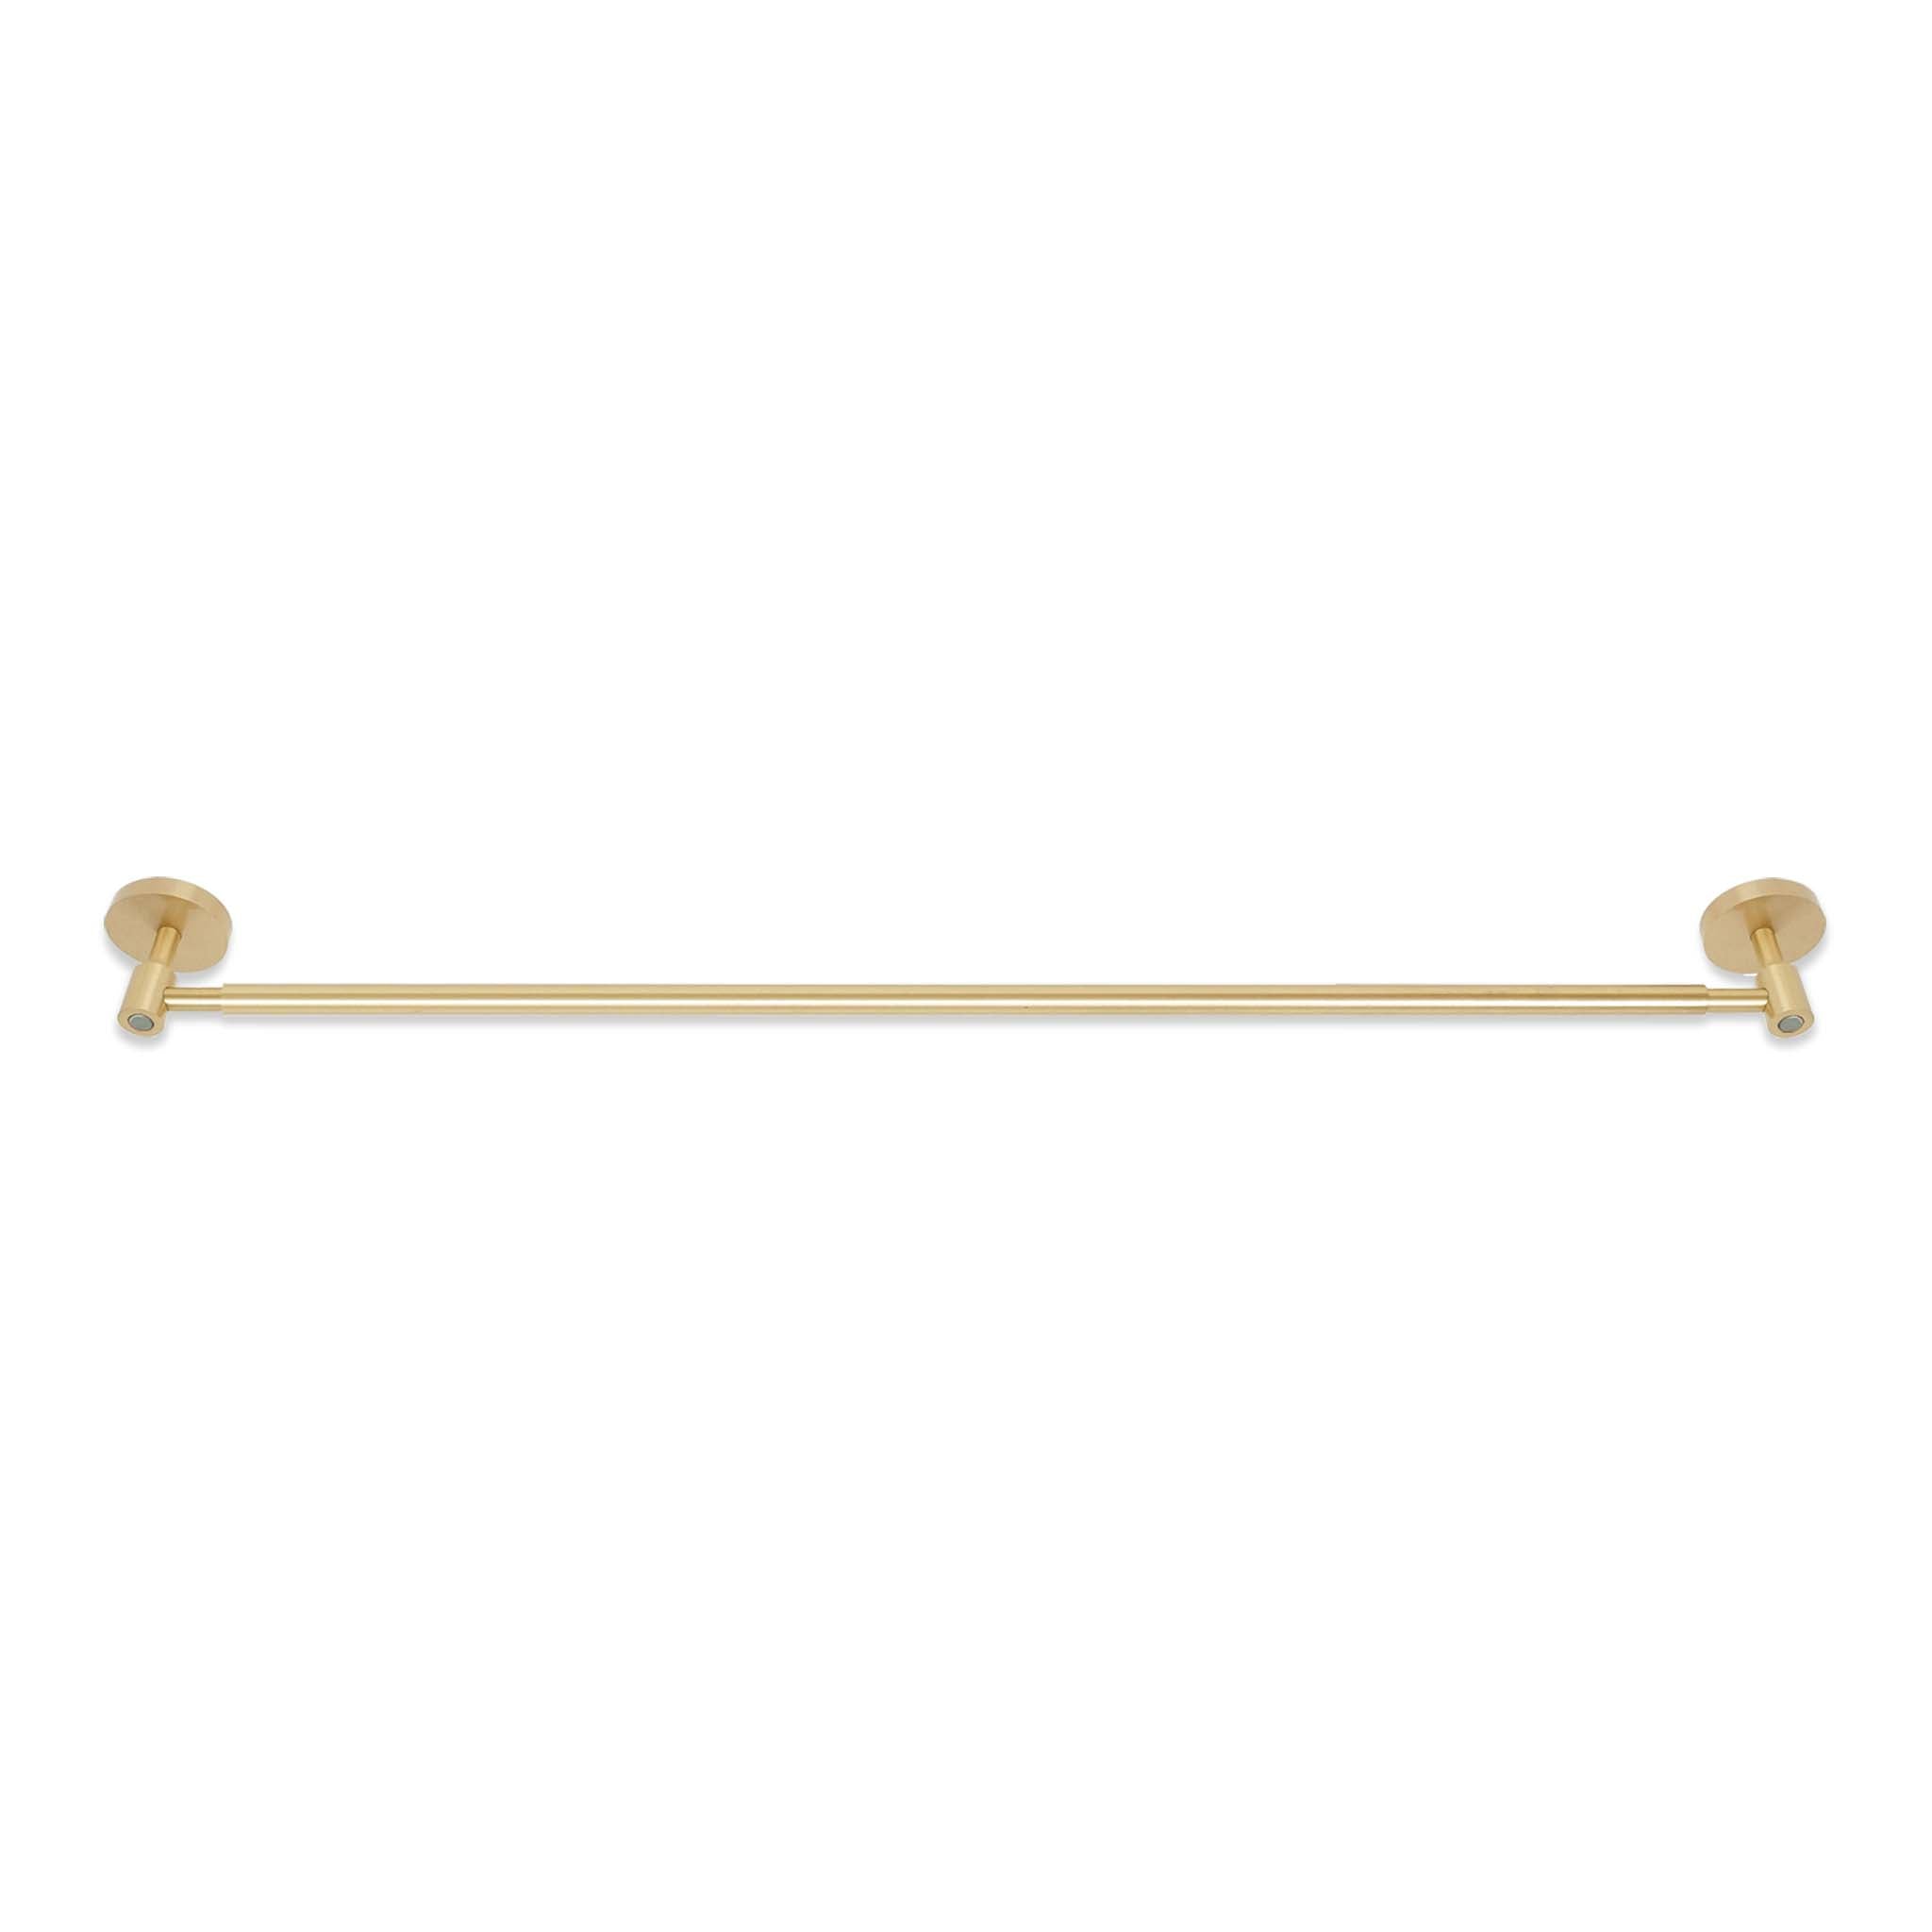 Brass and spa color Head towel bar 24" Dutton Brown hardware